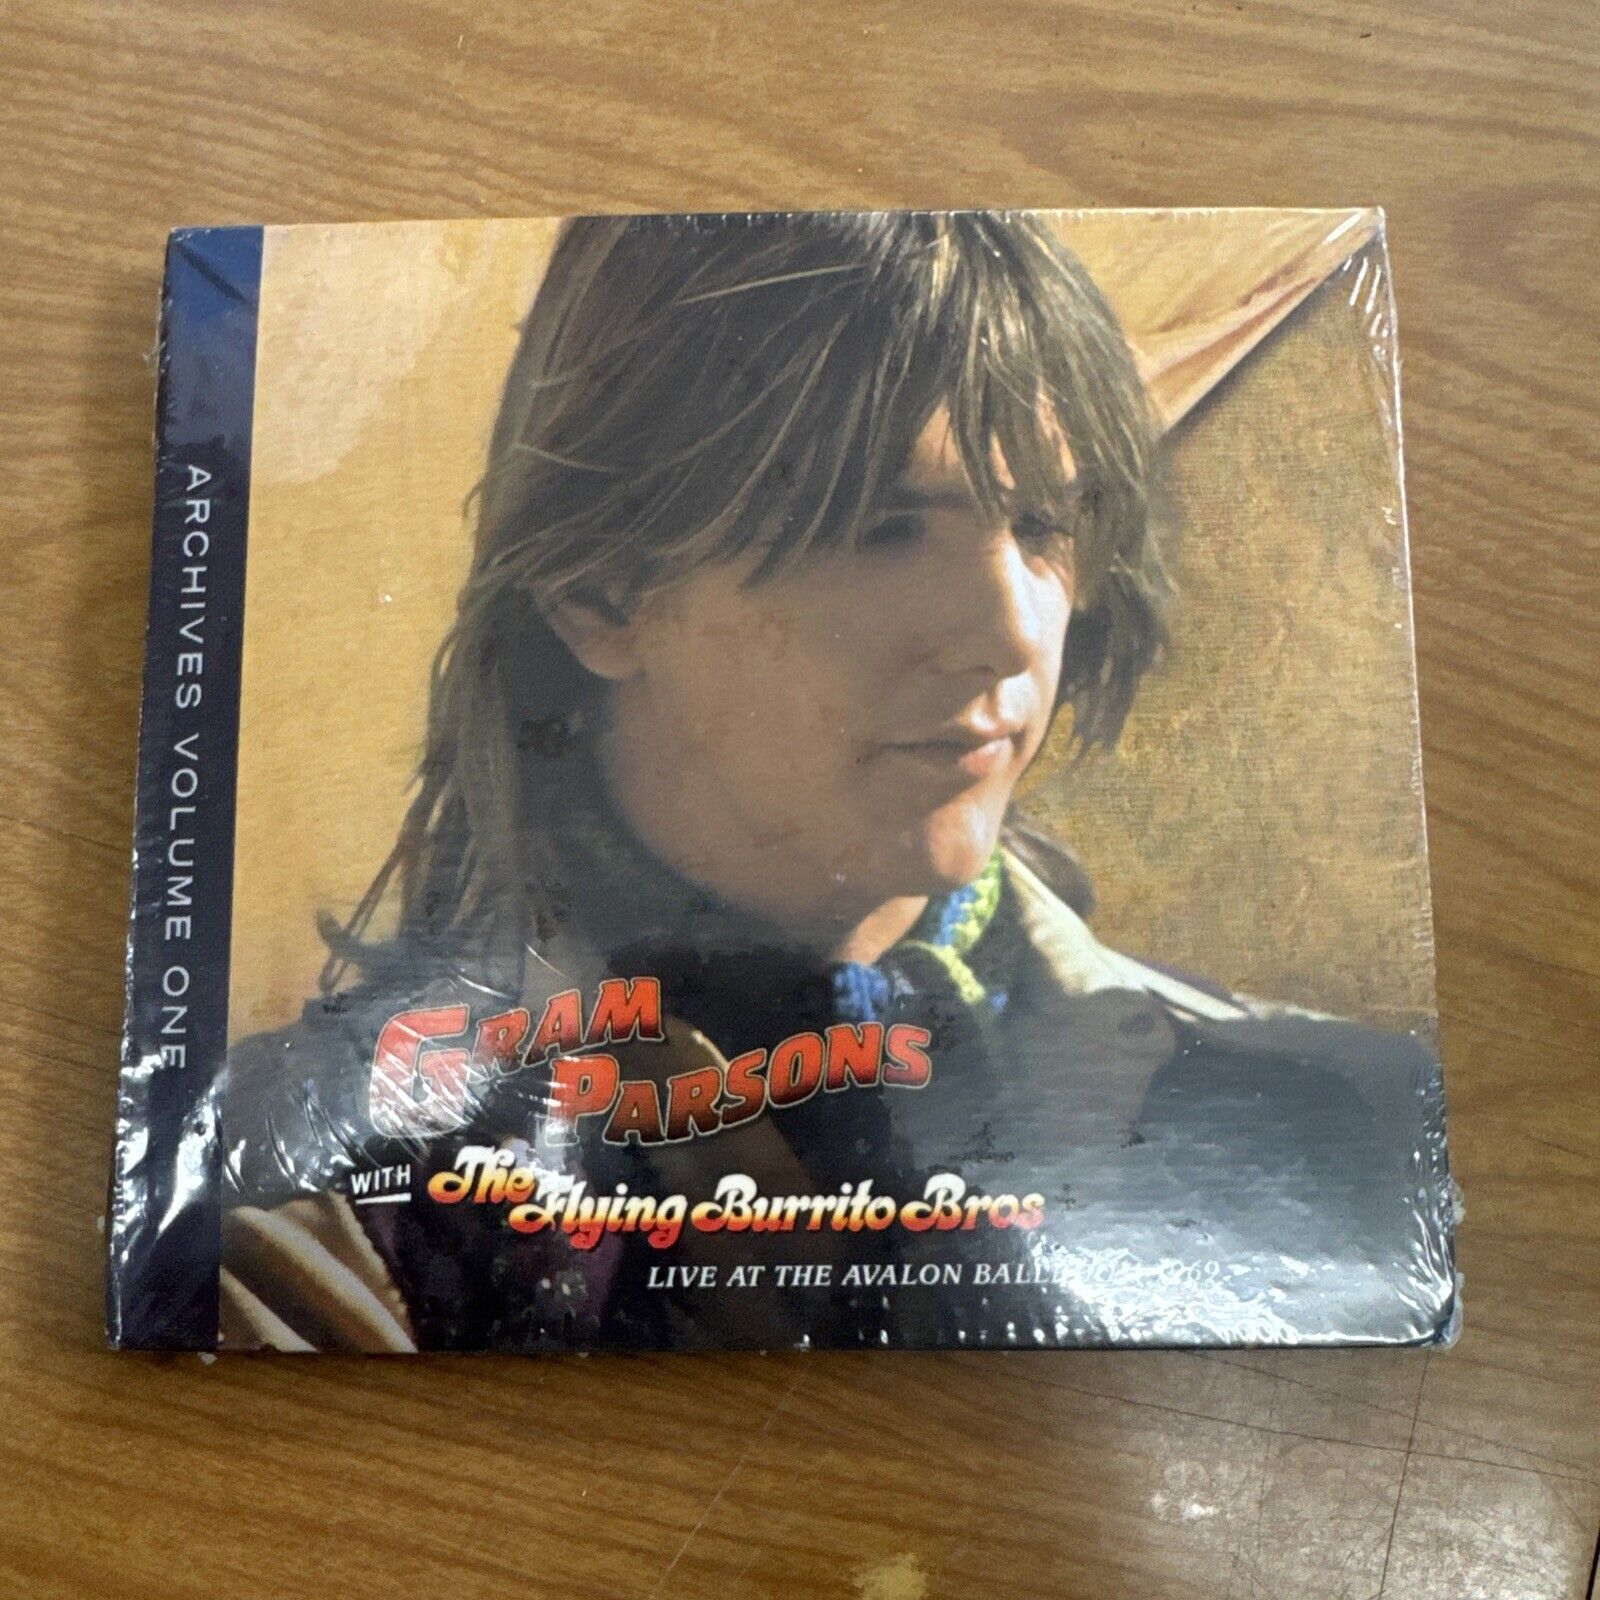 Gram Parsons, Flying Burrito Brothers - Live At The Avalon 1969 CD ~ SEALED NEW